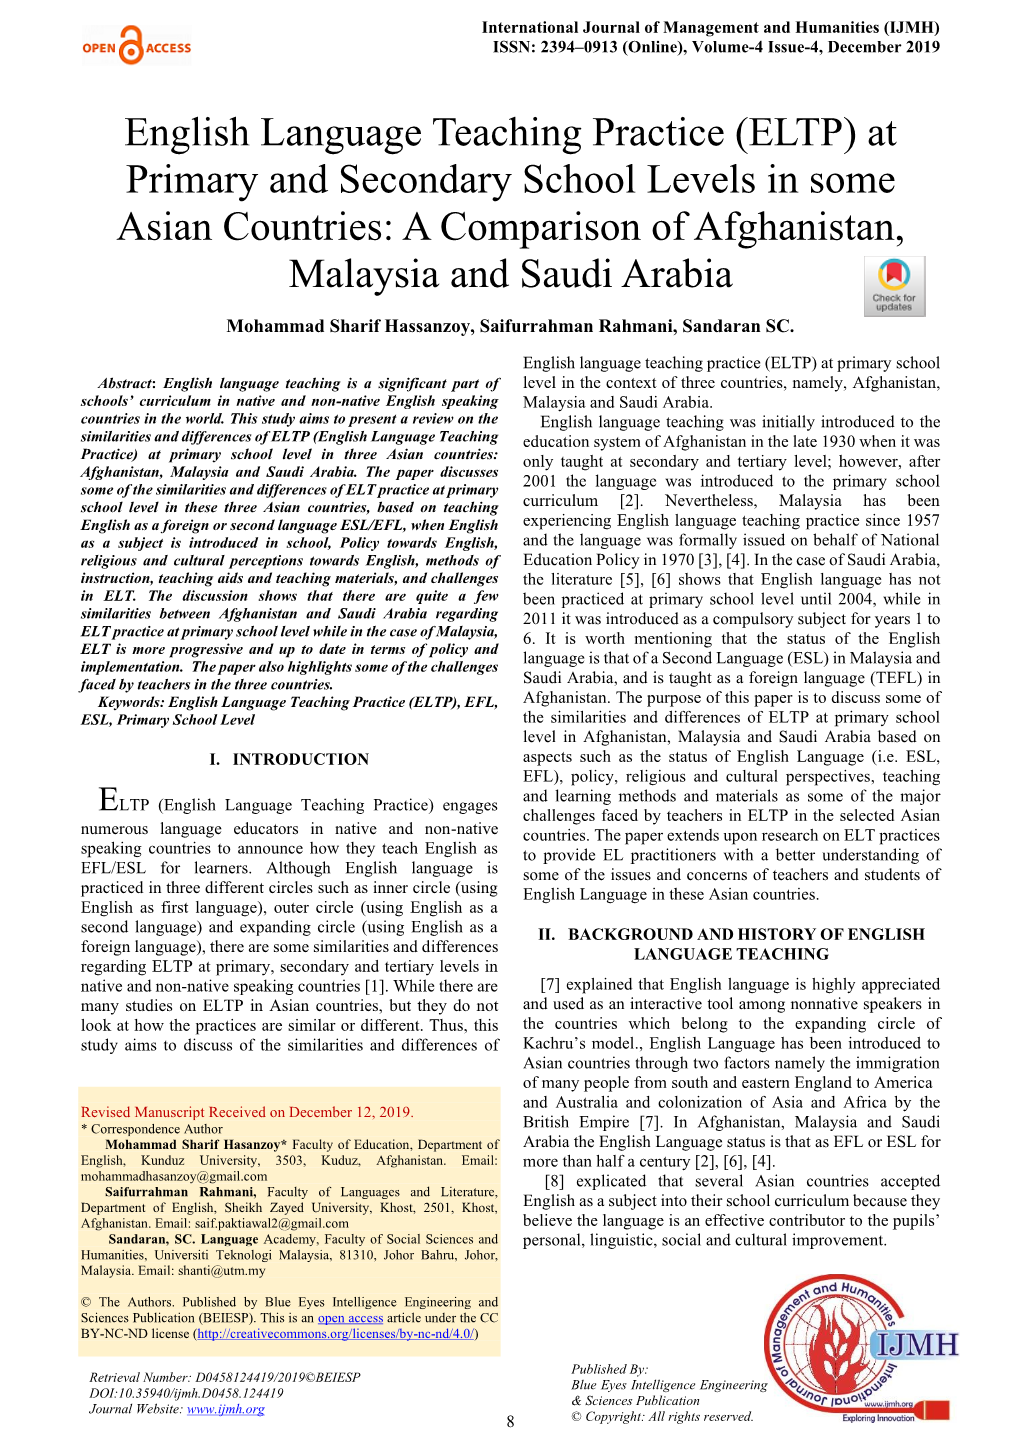 English Language Teaching Practice (ELTP) at Primary and Secondary School Levels in Some Asian Countries: a Comparison of Afghanistan, Malaysia and Saudi Arabia